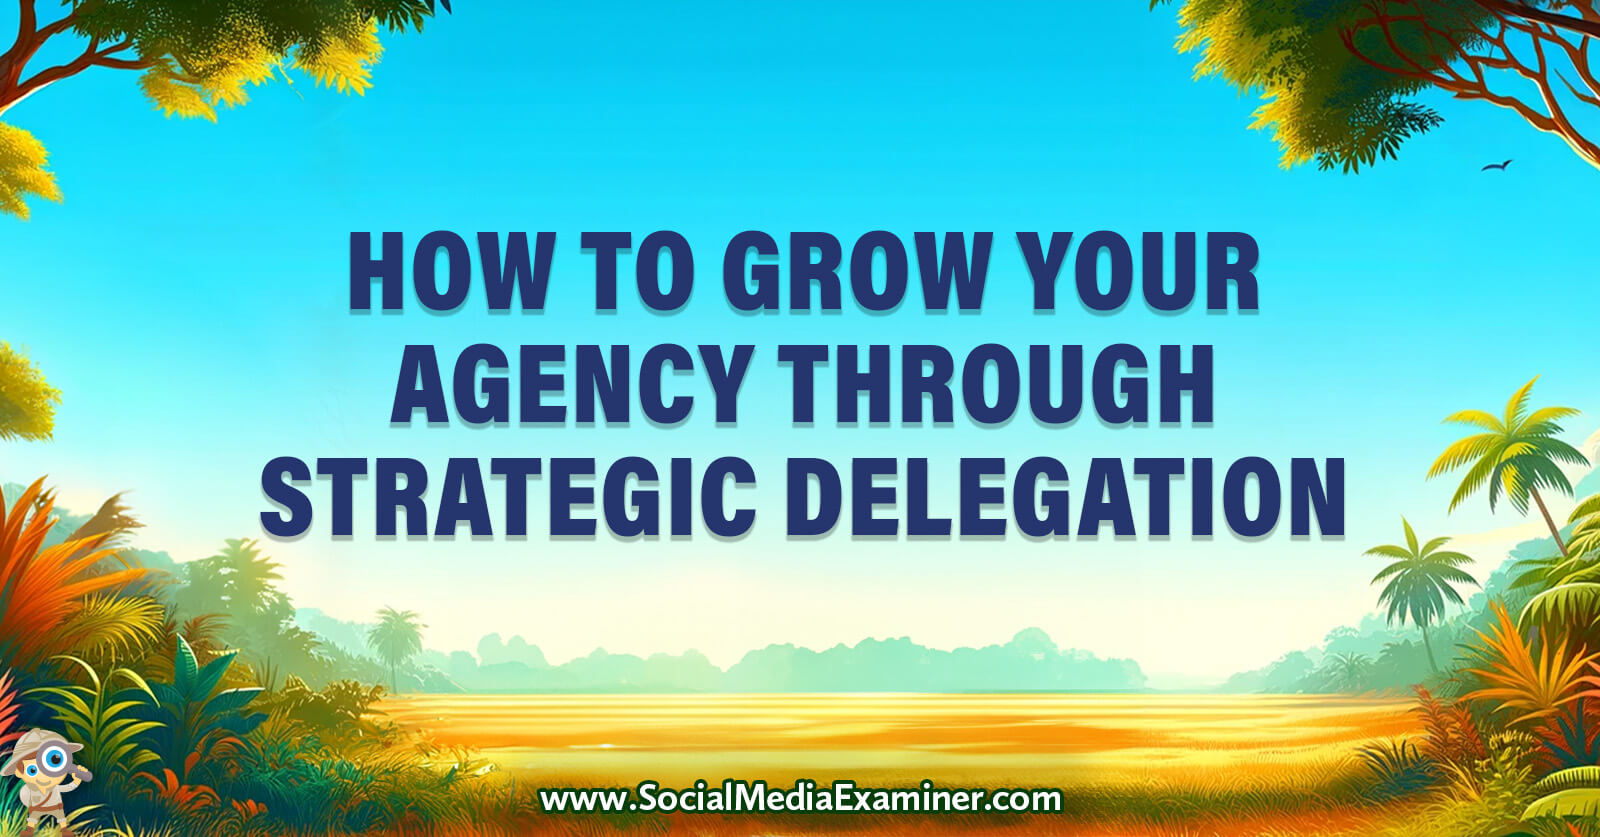 How to Grow Your Agency Through Strategic Delegation by Social Media Examiner